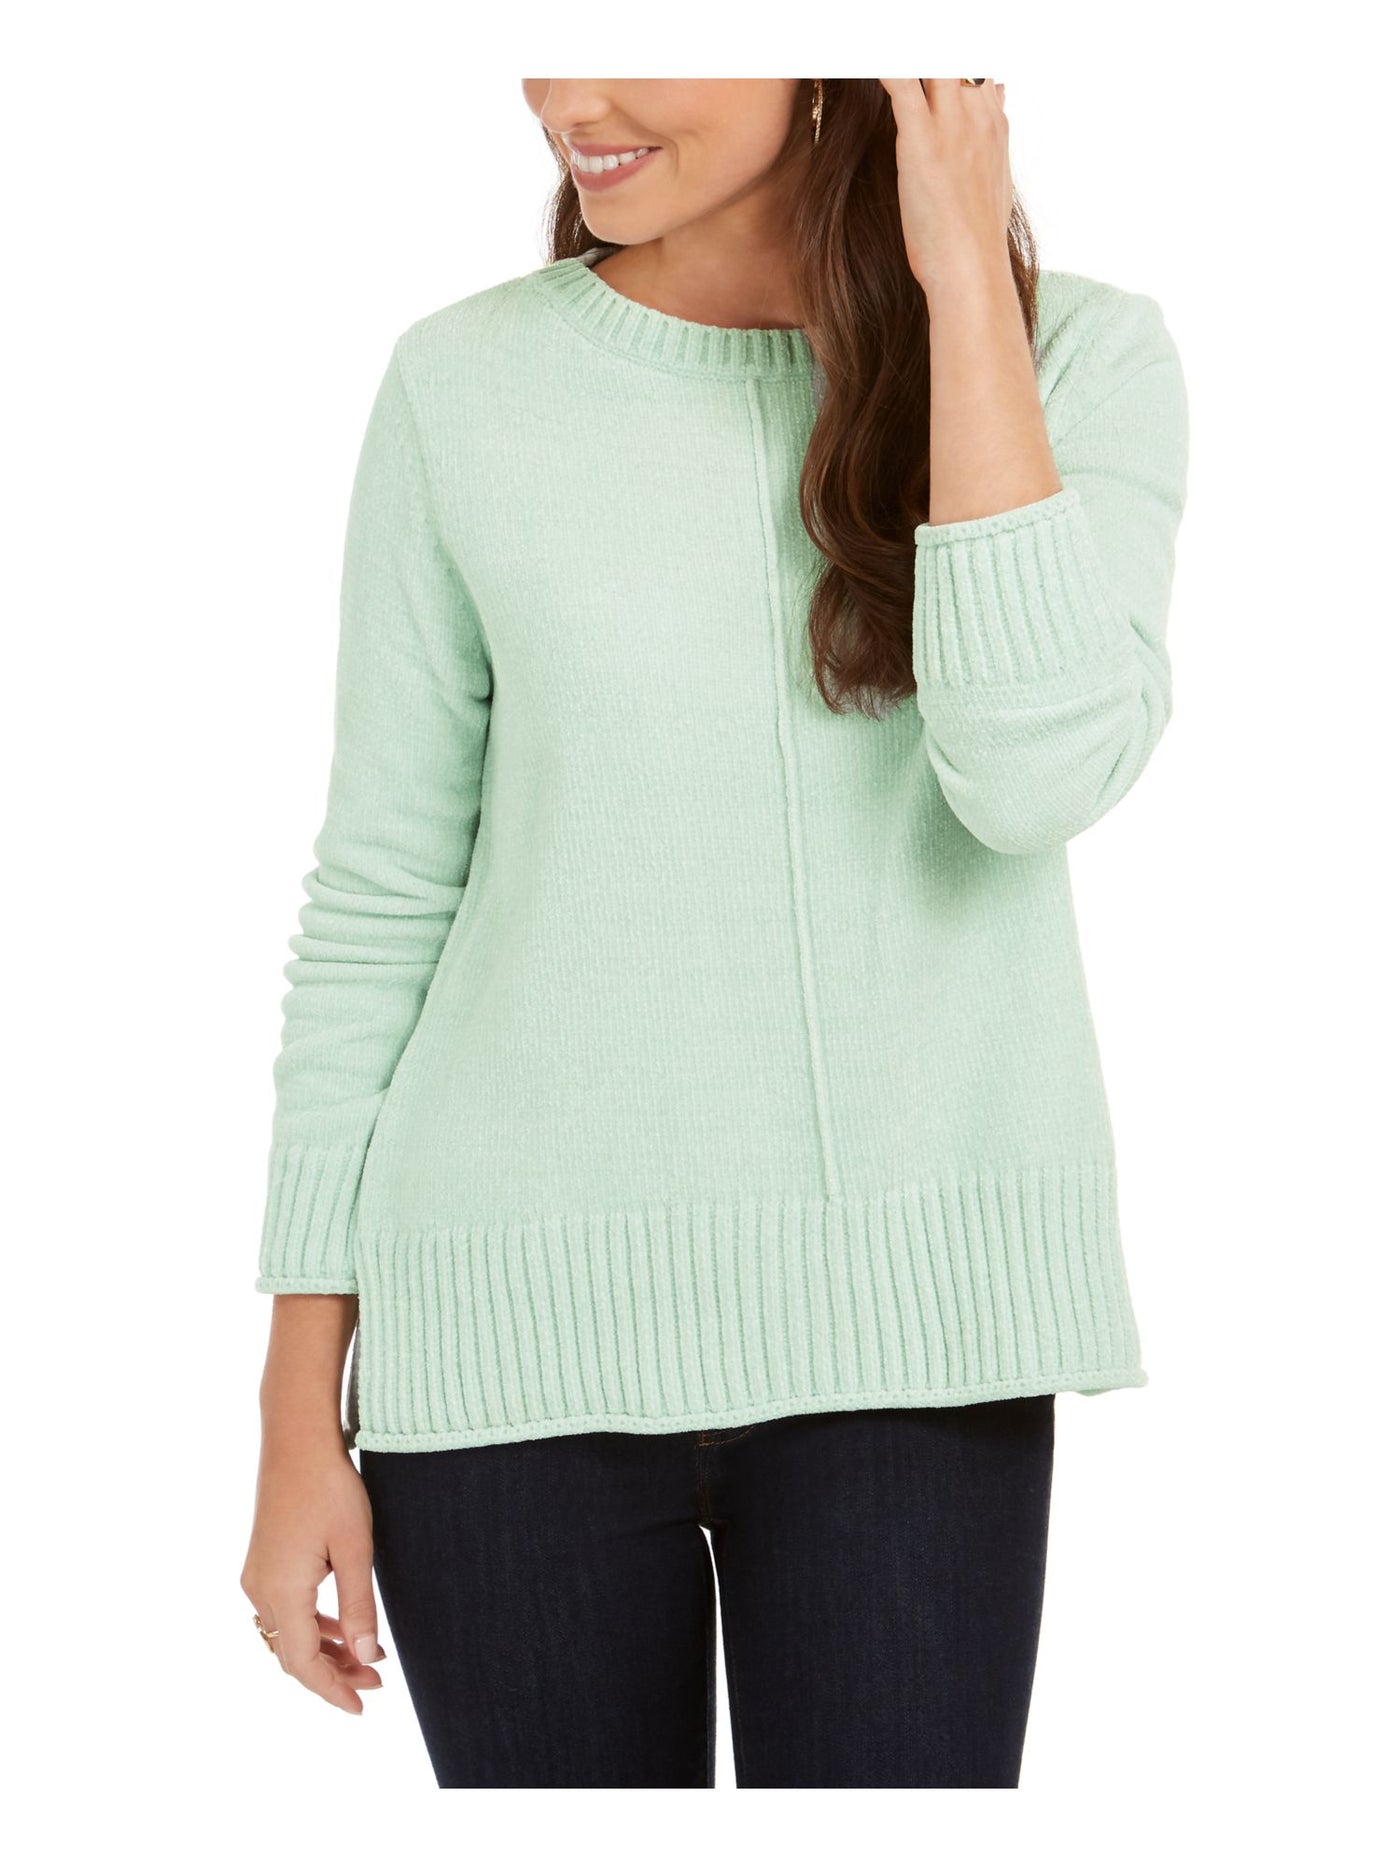 STYLE & COMPANY Womens Textured Ribbed Ribbed 3/4 Sleeve Crew Neck Sweater